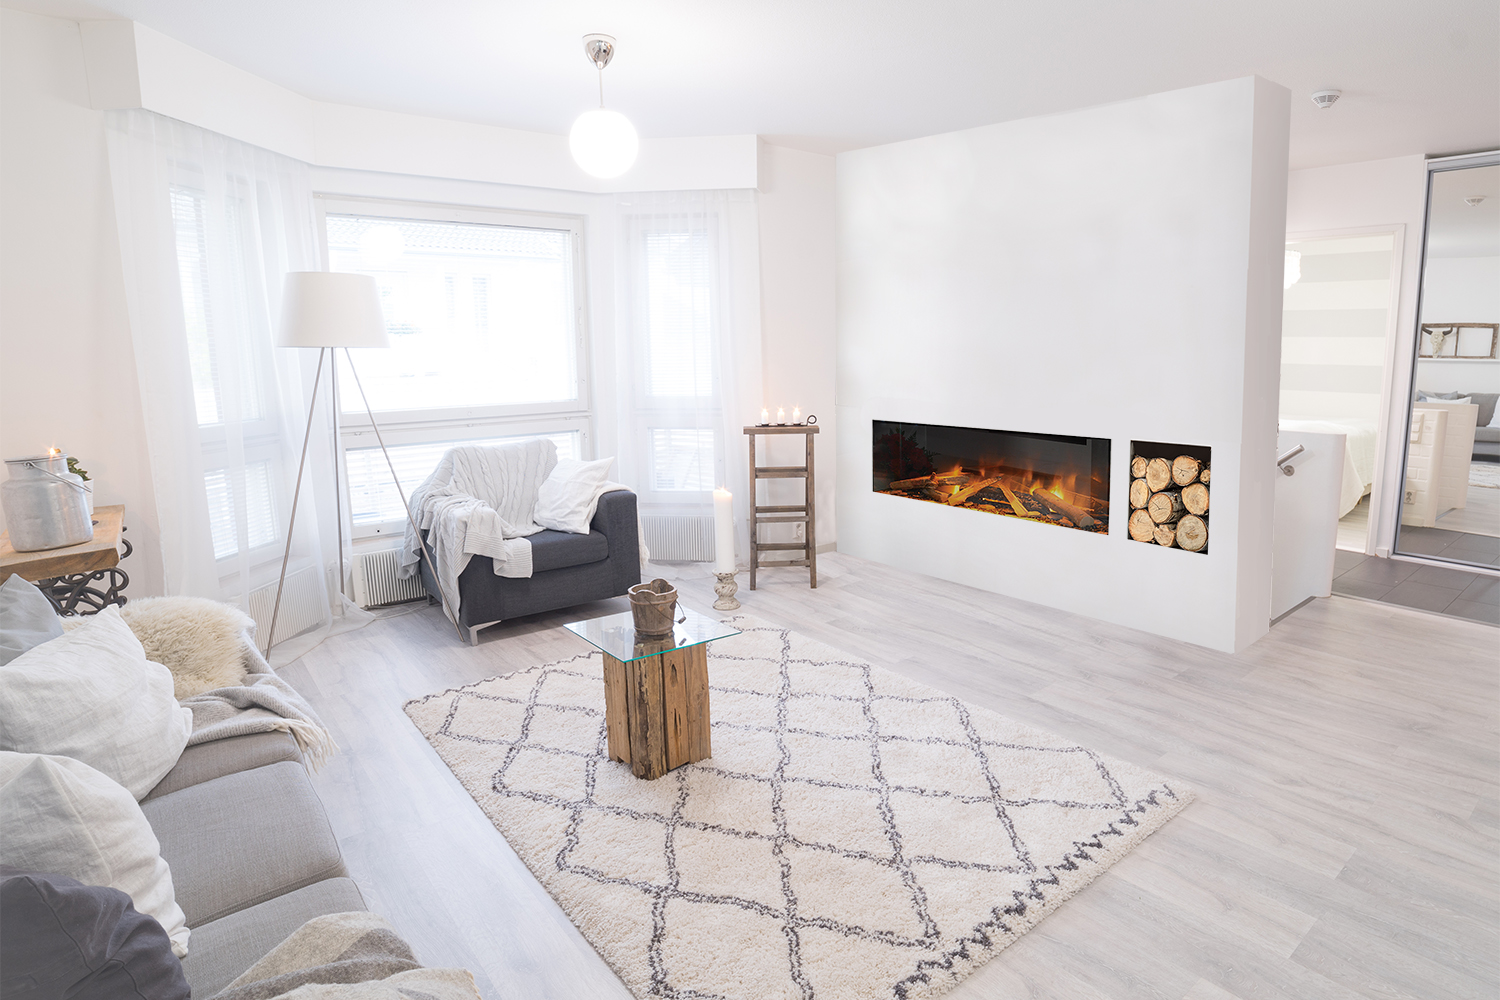 E40 linear electric fireplace by Electric Modern